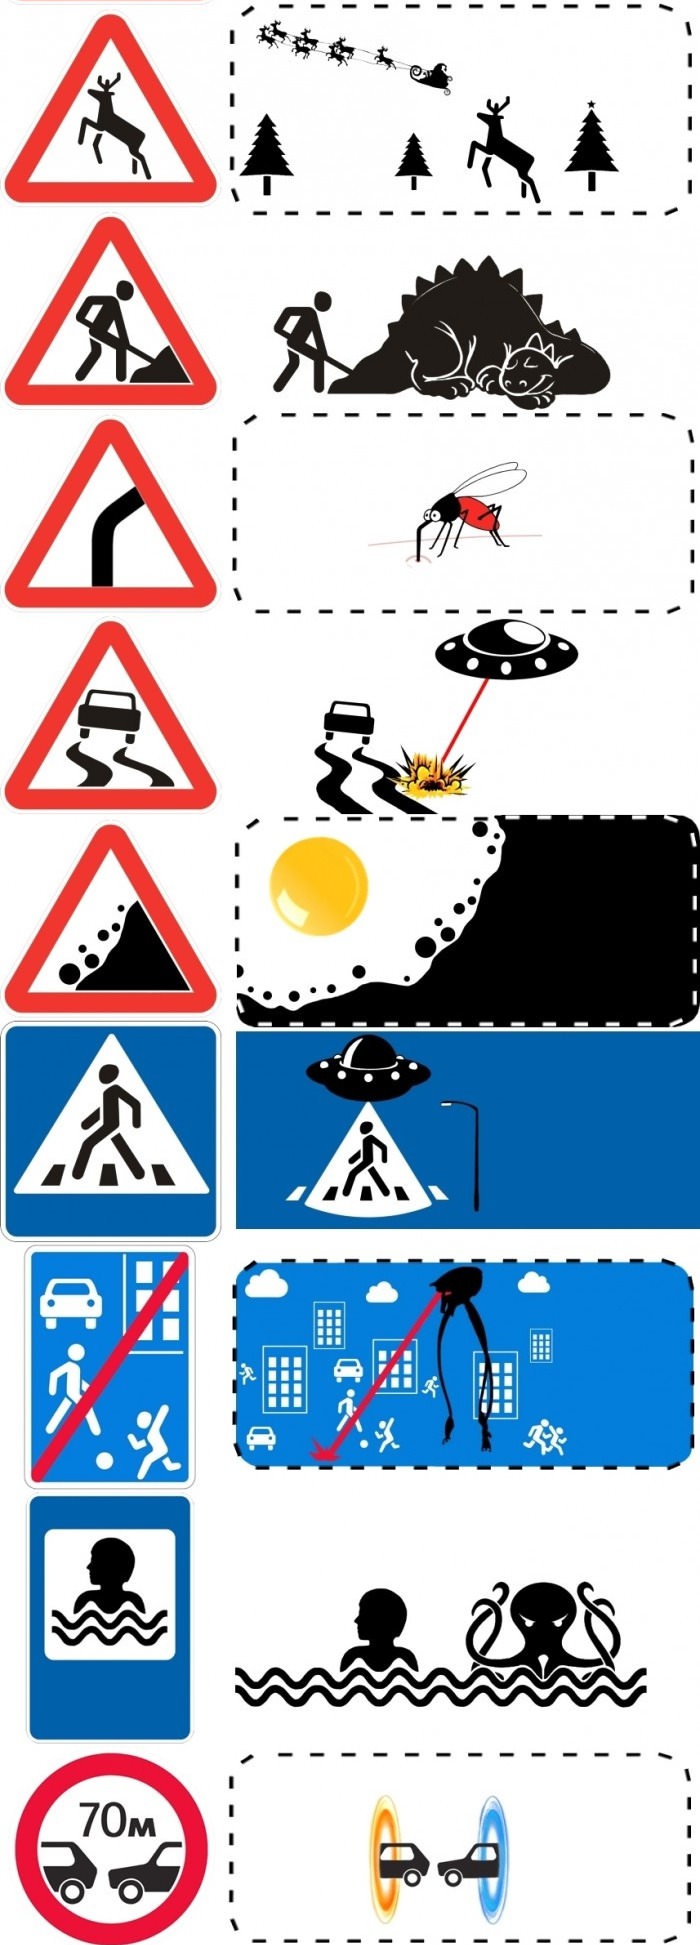 uncropped road signs, you will never see these road signs the same way again